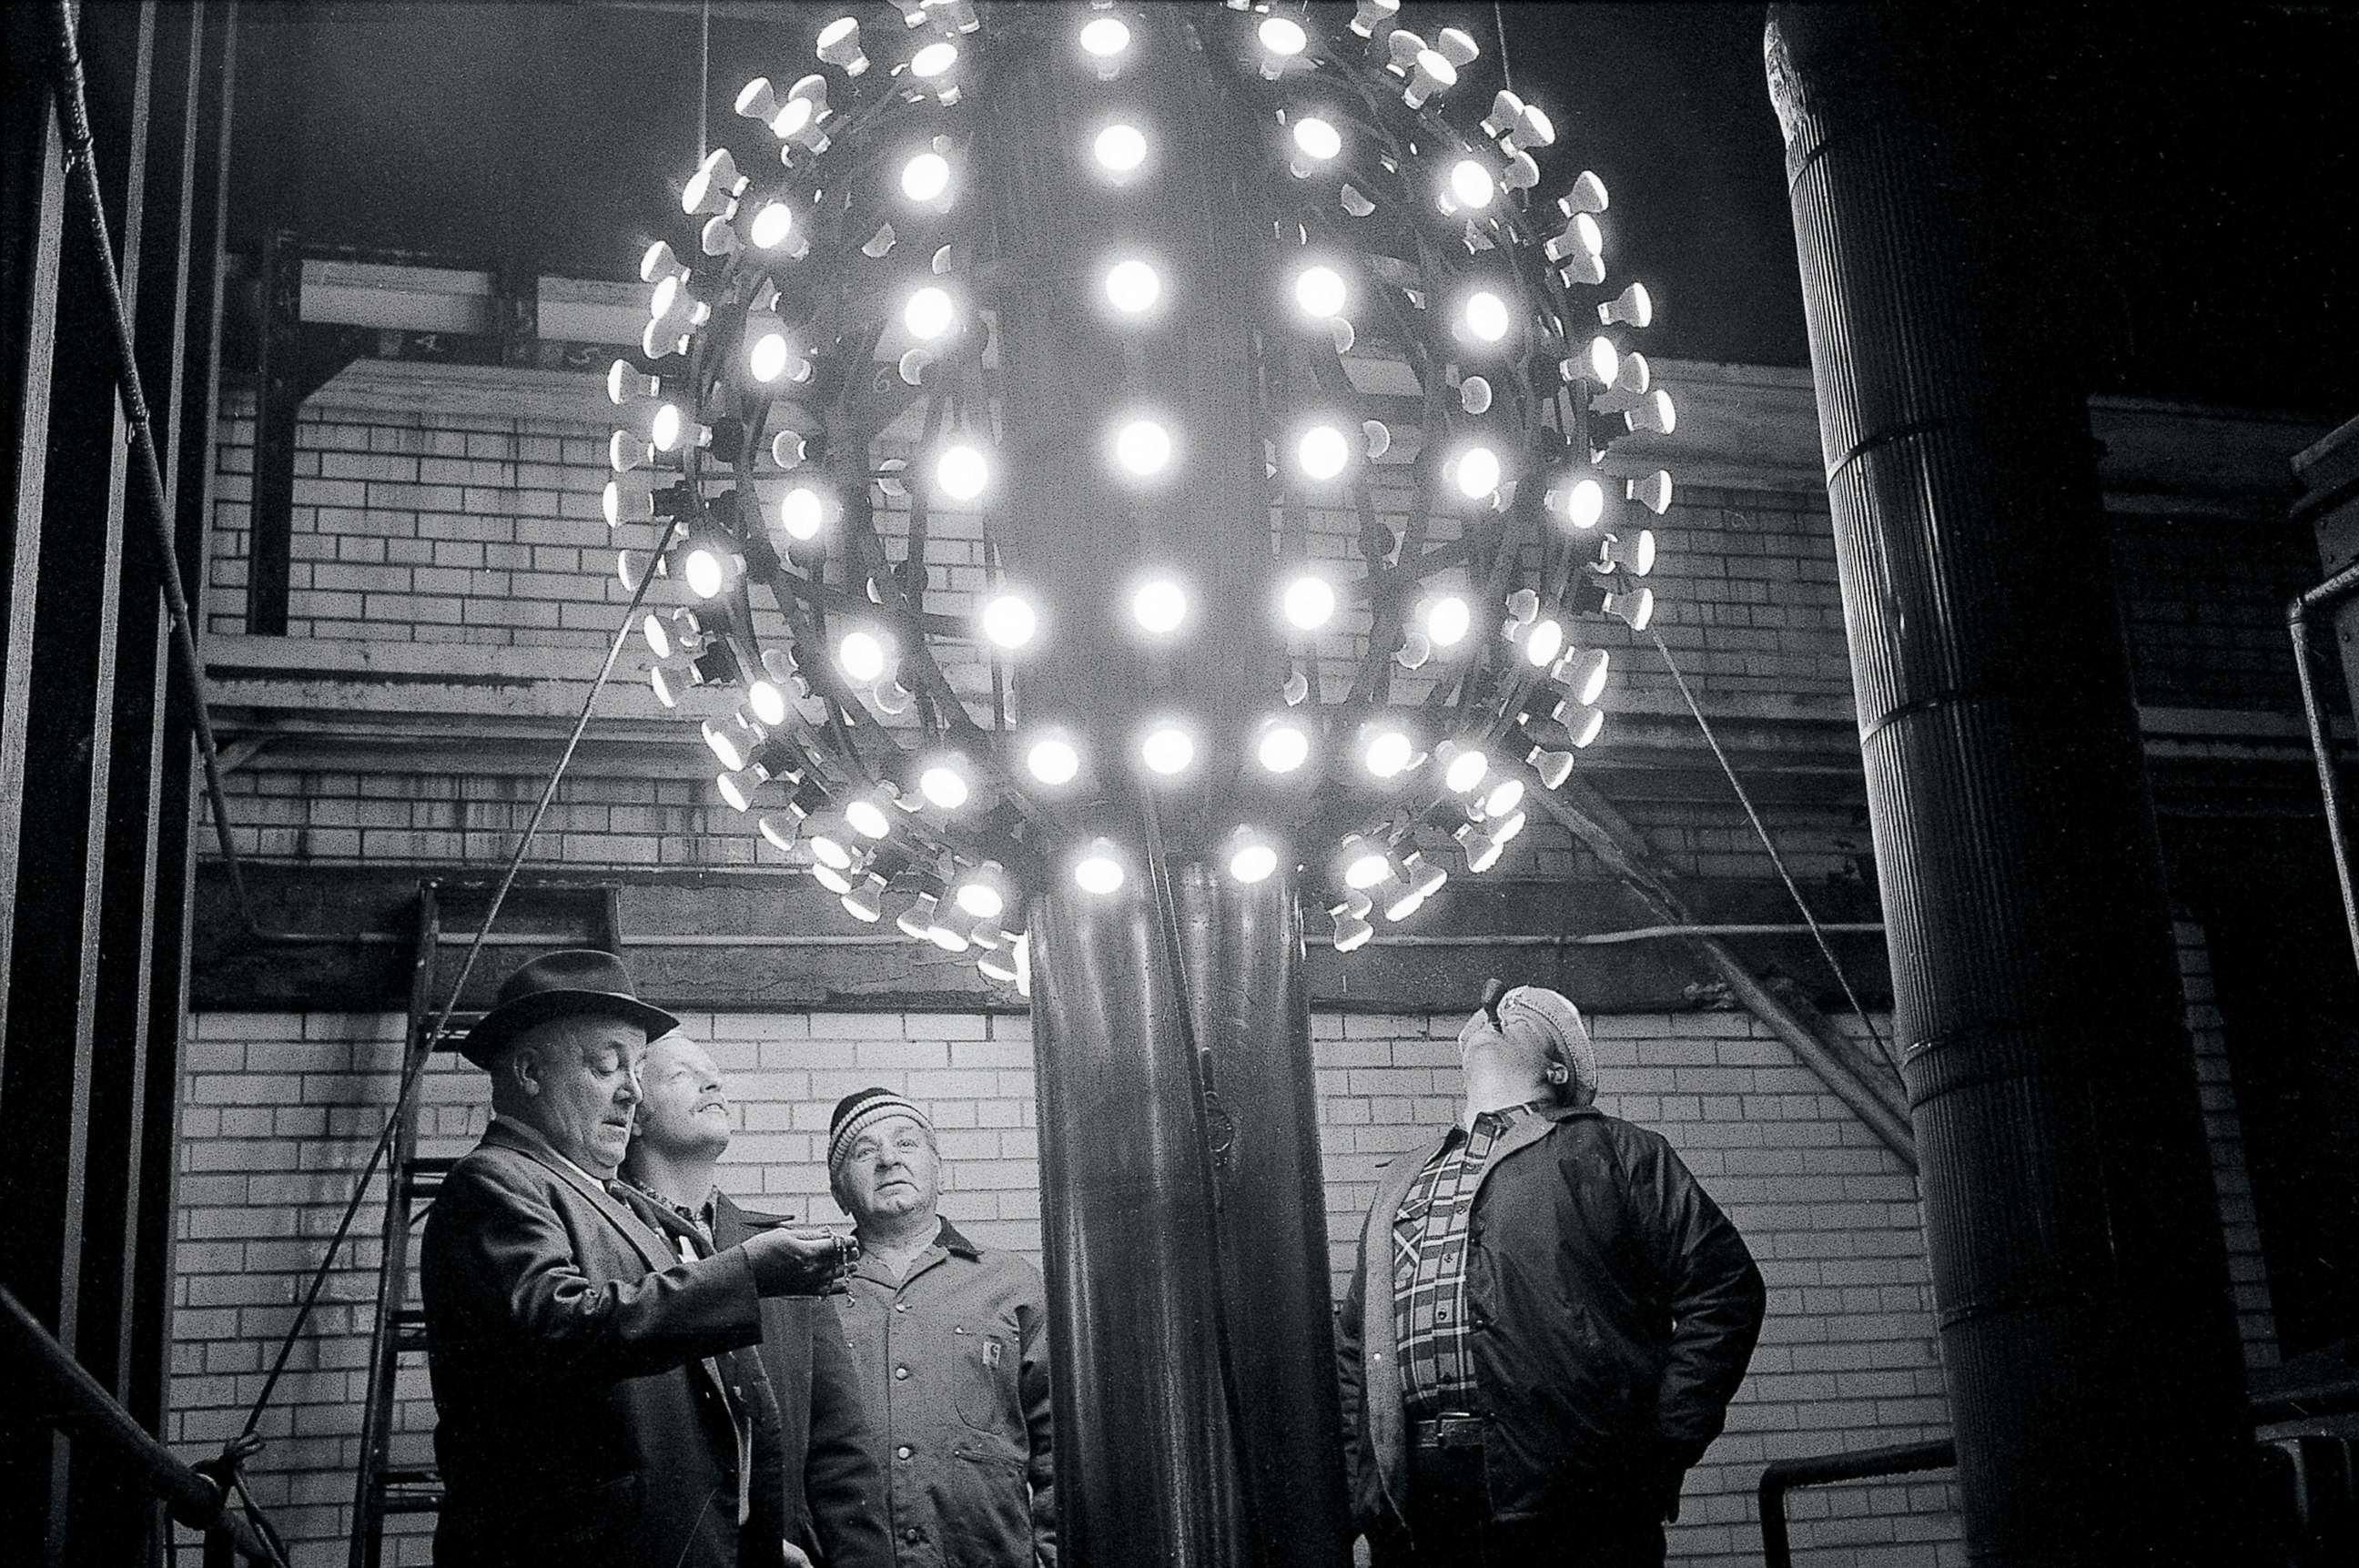 PHOTO: In this 1978 file photo, technicians eye the new improved Times Square's New Years Eve Ball. This version, which had halogen lamps for higher visibility, replaced a six-foot ball that had ordinary light bulbs.